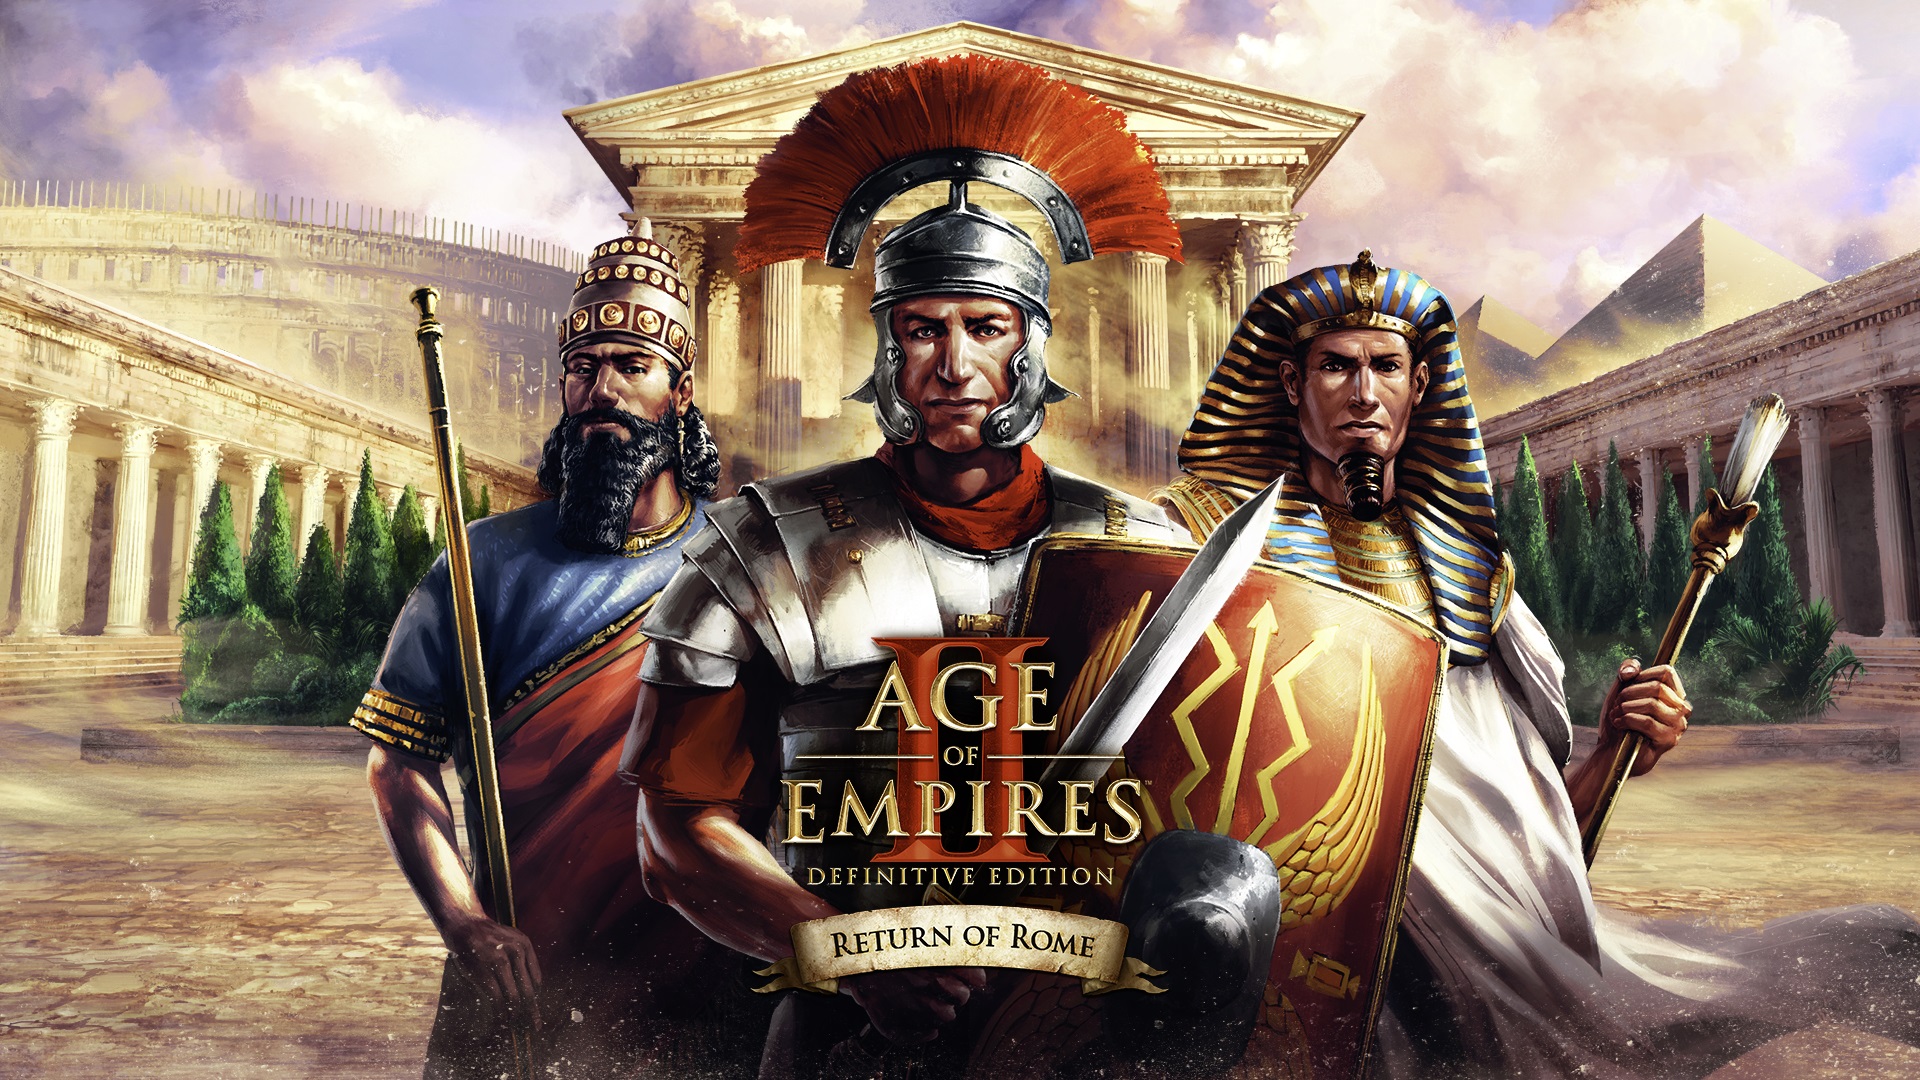 'Return of Rome' Comes to Age of Empires II Definitive Edition May